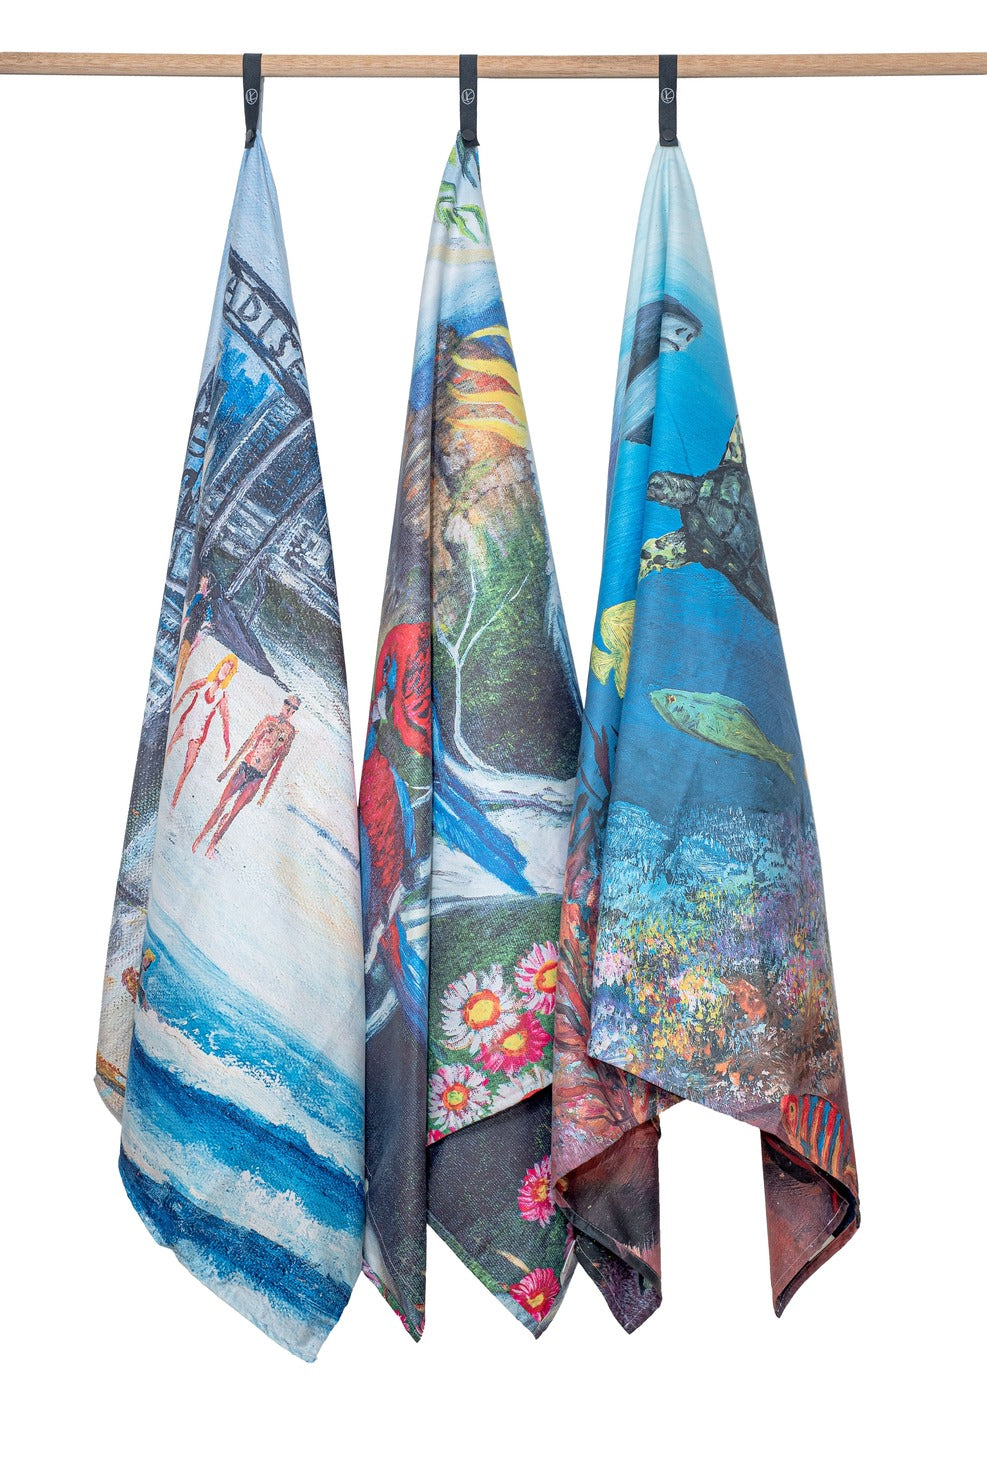 Surfers Paradise, Blue Mountains and The Great Barrier Reef microfibre artistic towels hanging. Large size, 170cm x 95cm, soft touch, compact and sand free beach towel. An Aussie-inspired art showcasing magnificent landmarks and the Aussie lifestyle.